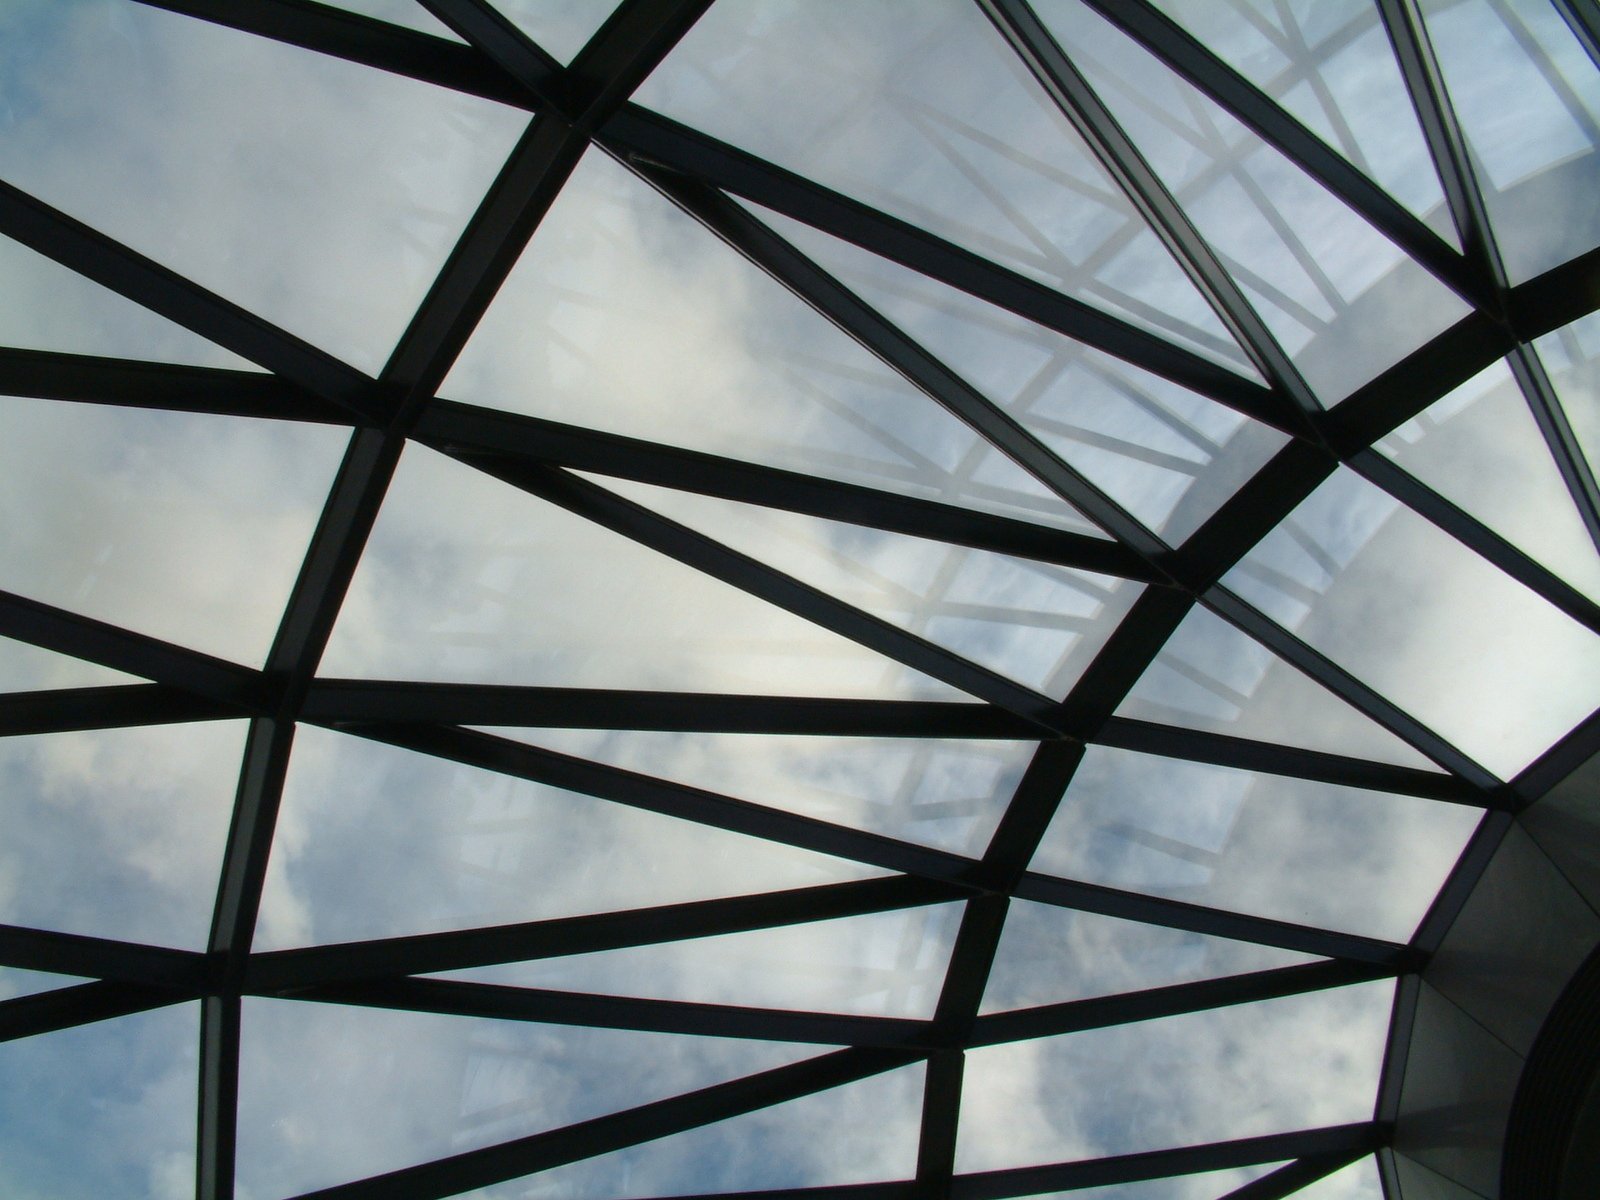 view up through the glass roof of a dome